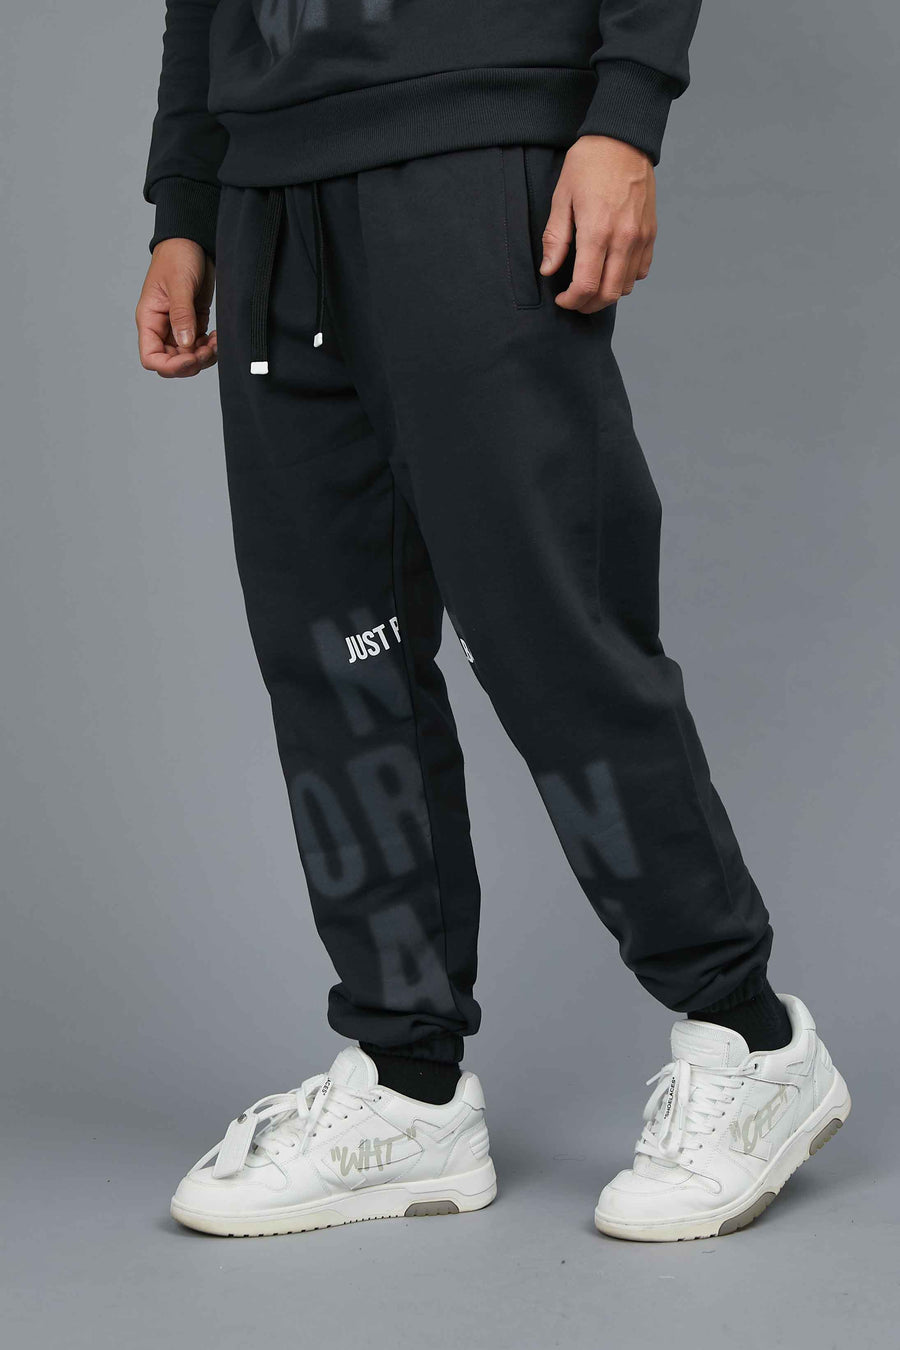 SCRIPT TROUSERS FOCUSED NOT ORDINARY